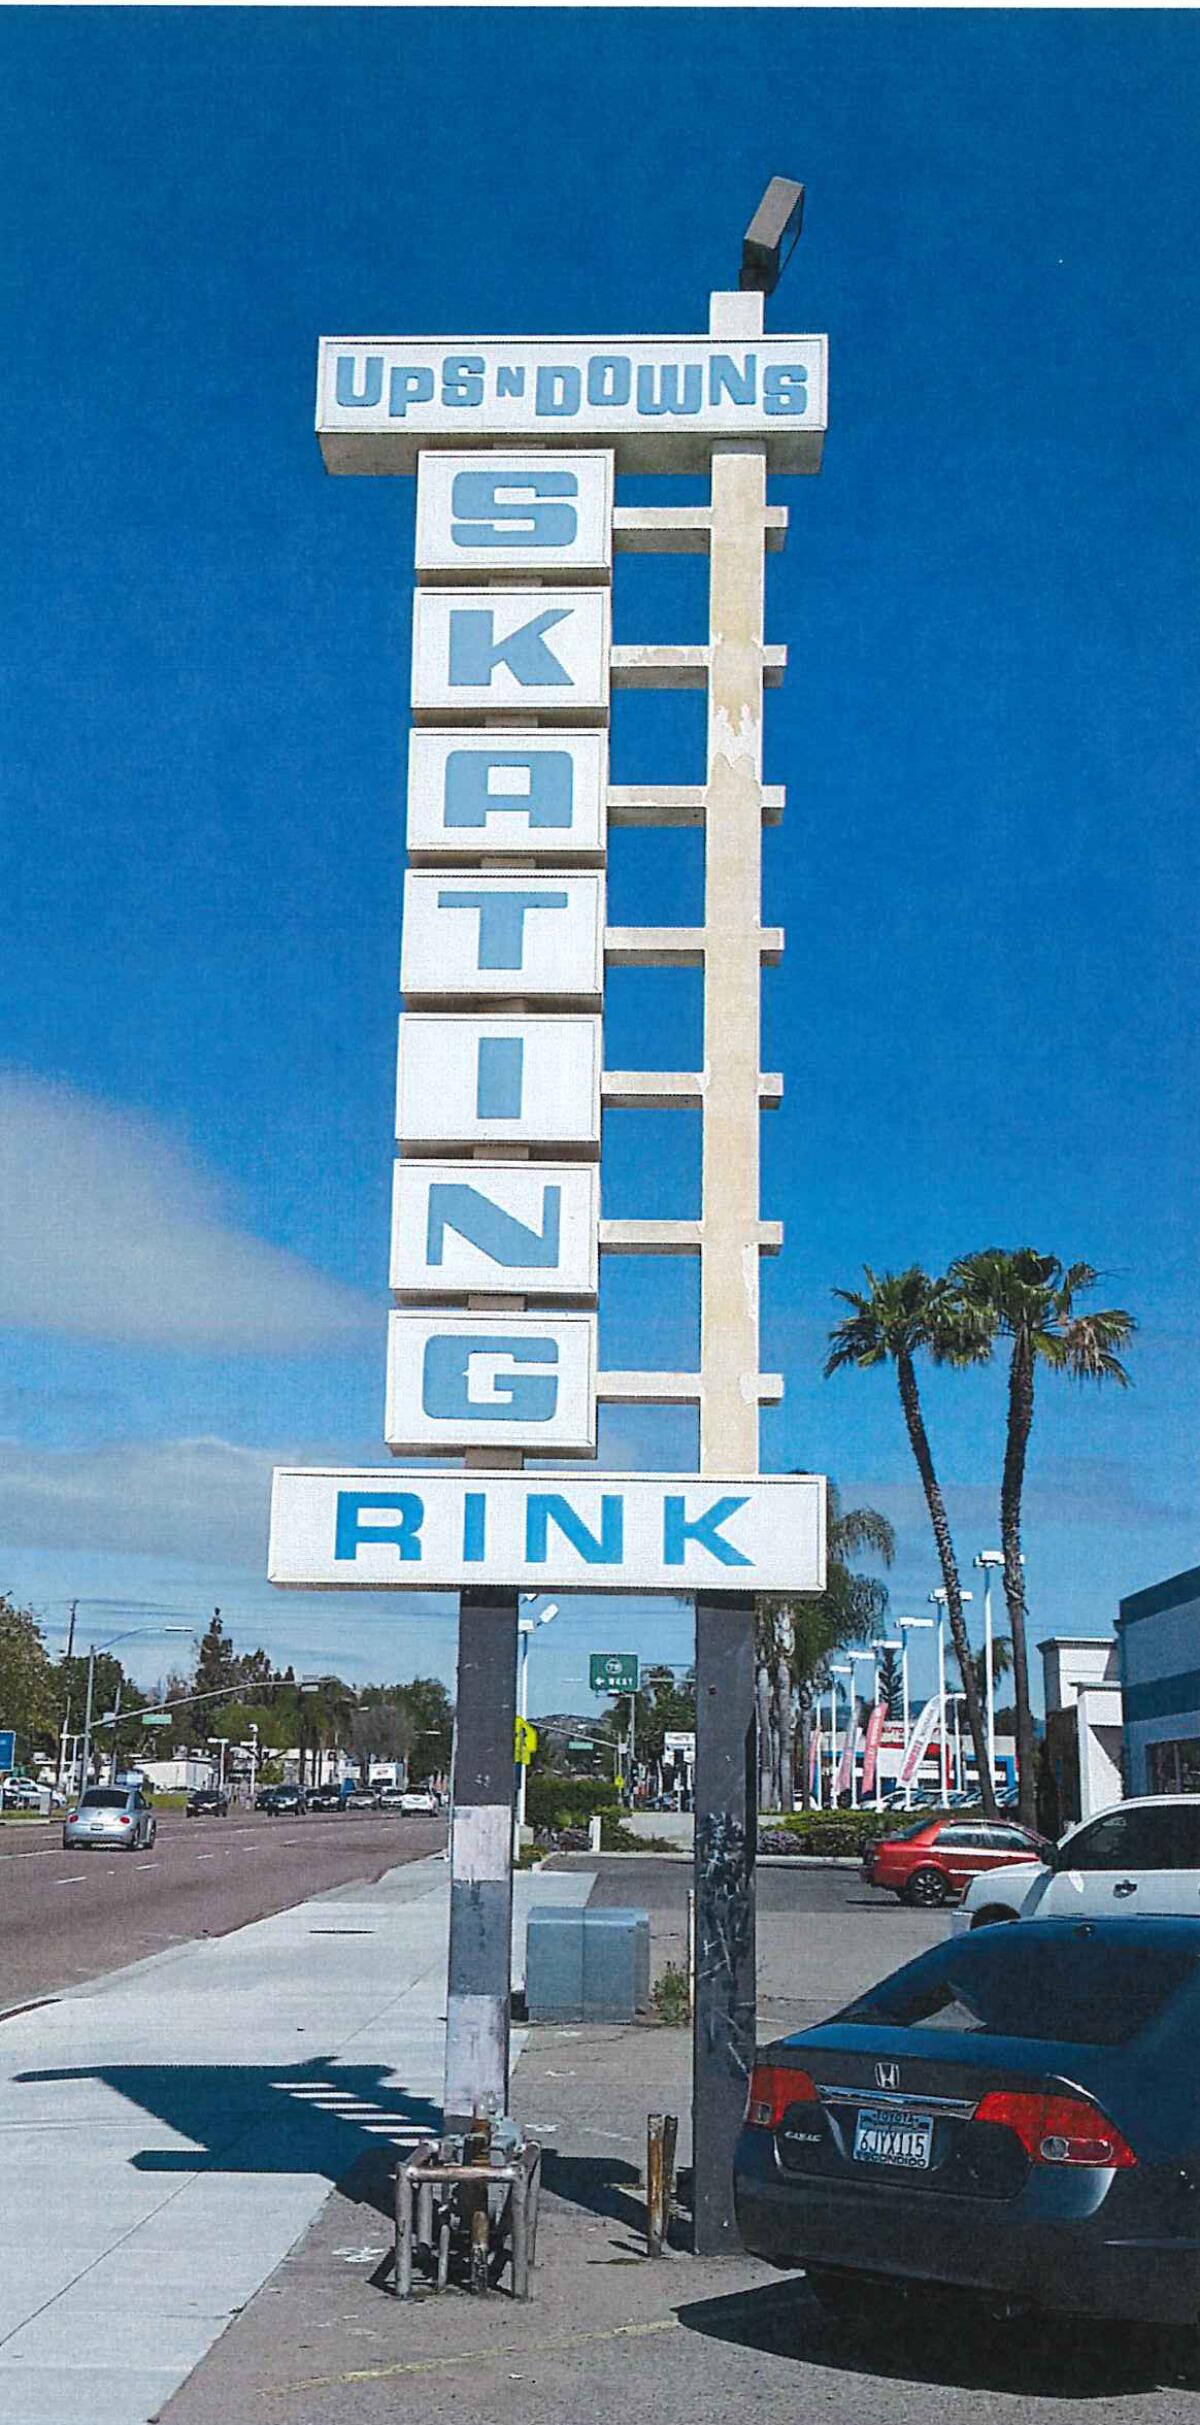 The Ups-N-Downs Skating Rink monument sign from 1977 in Escondido.